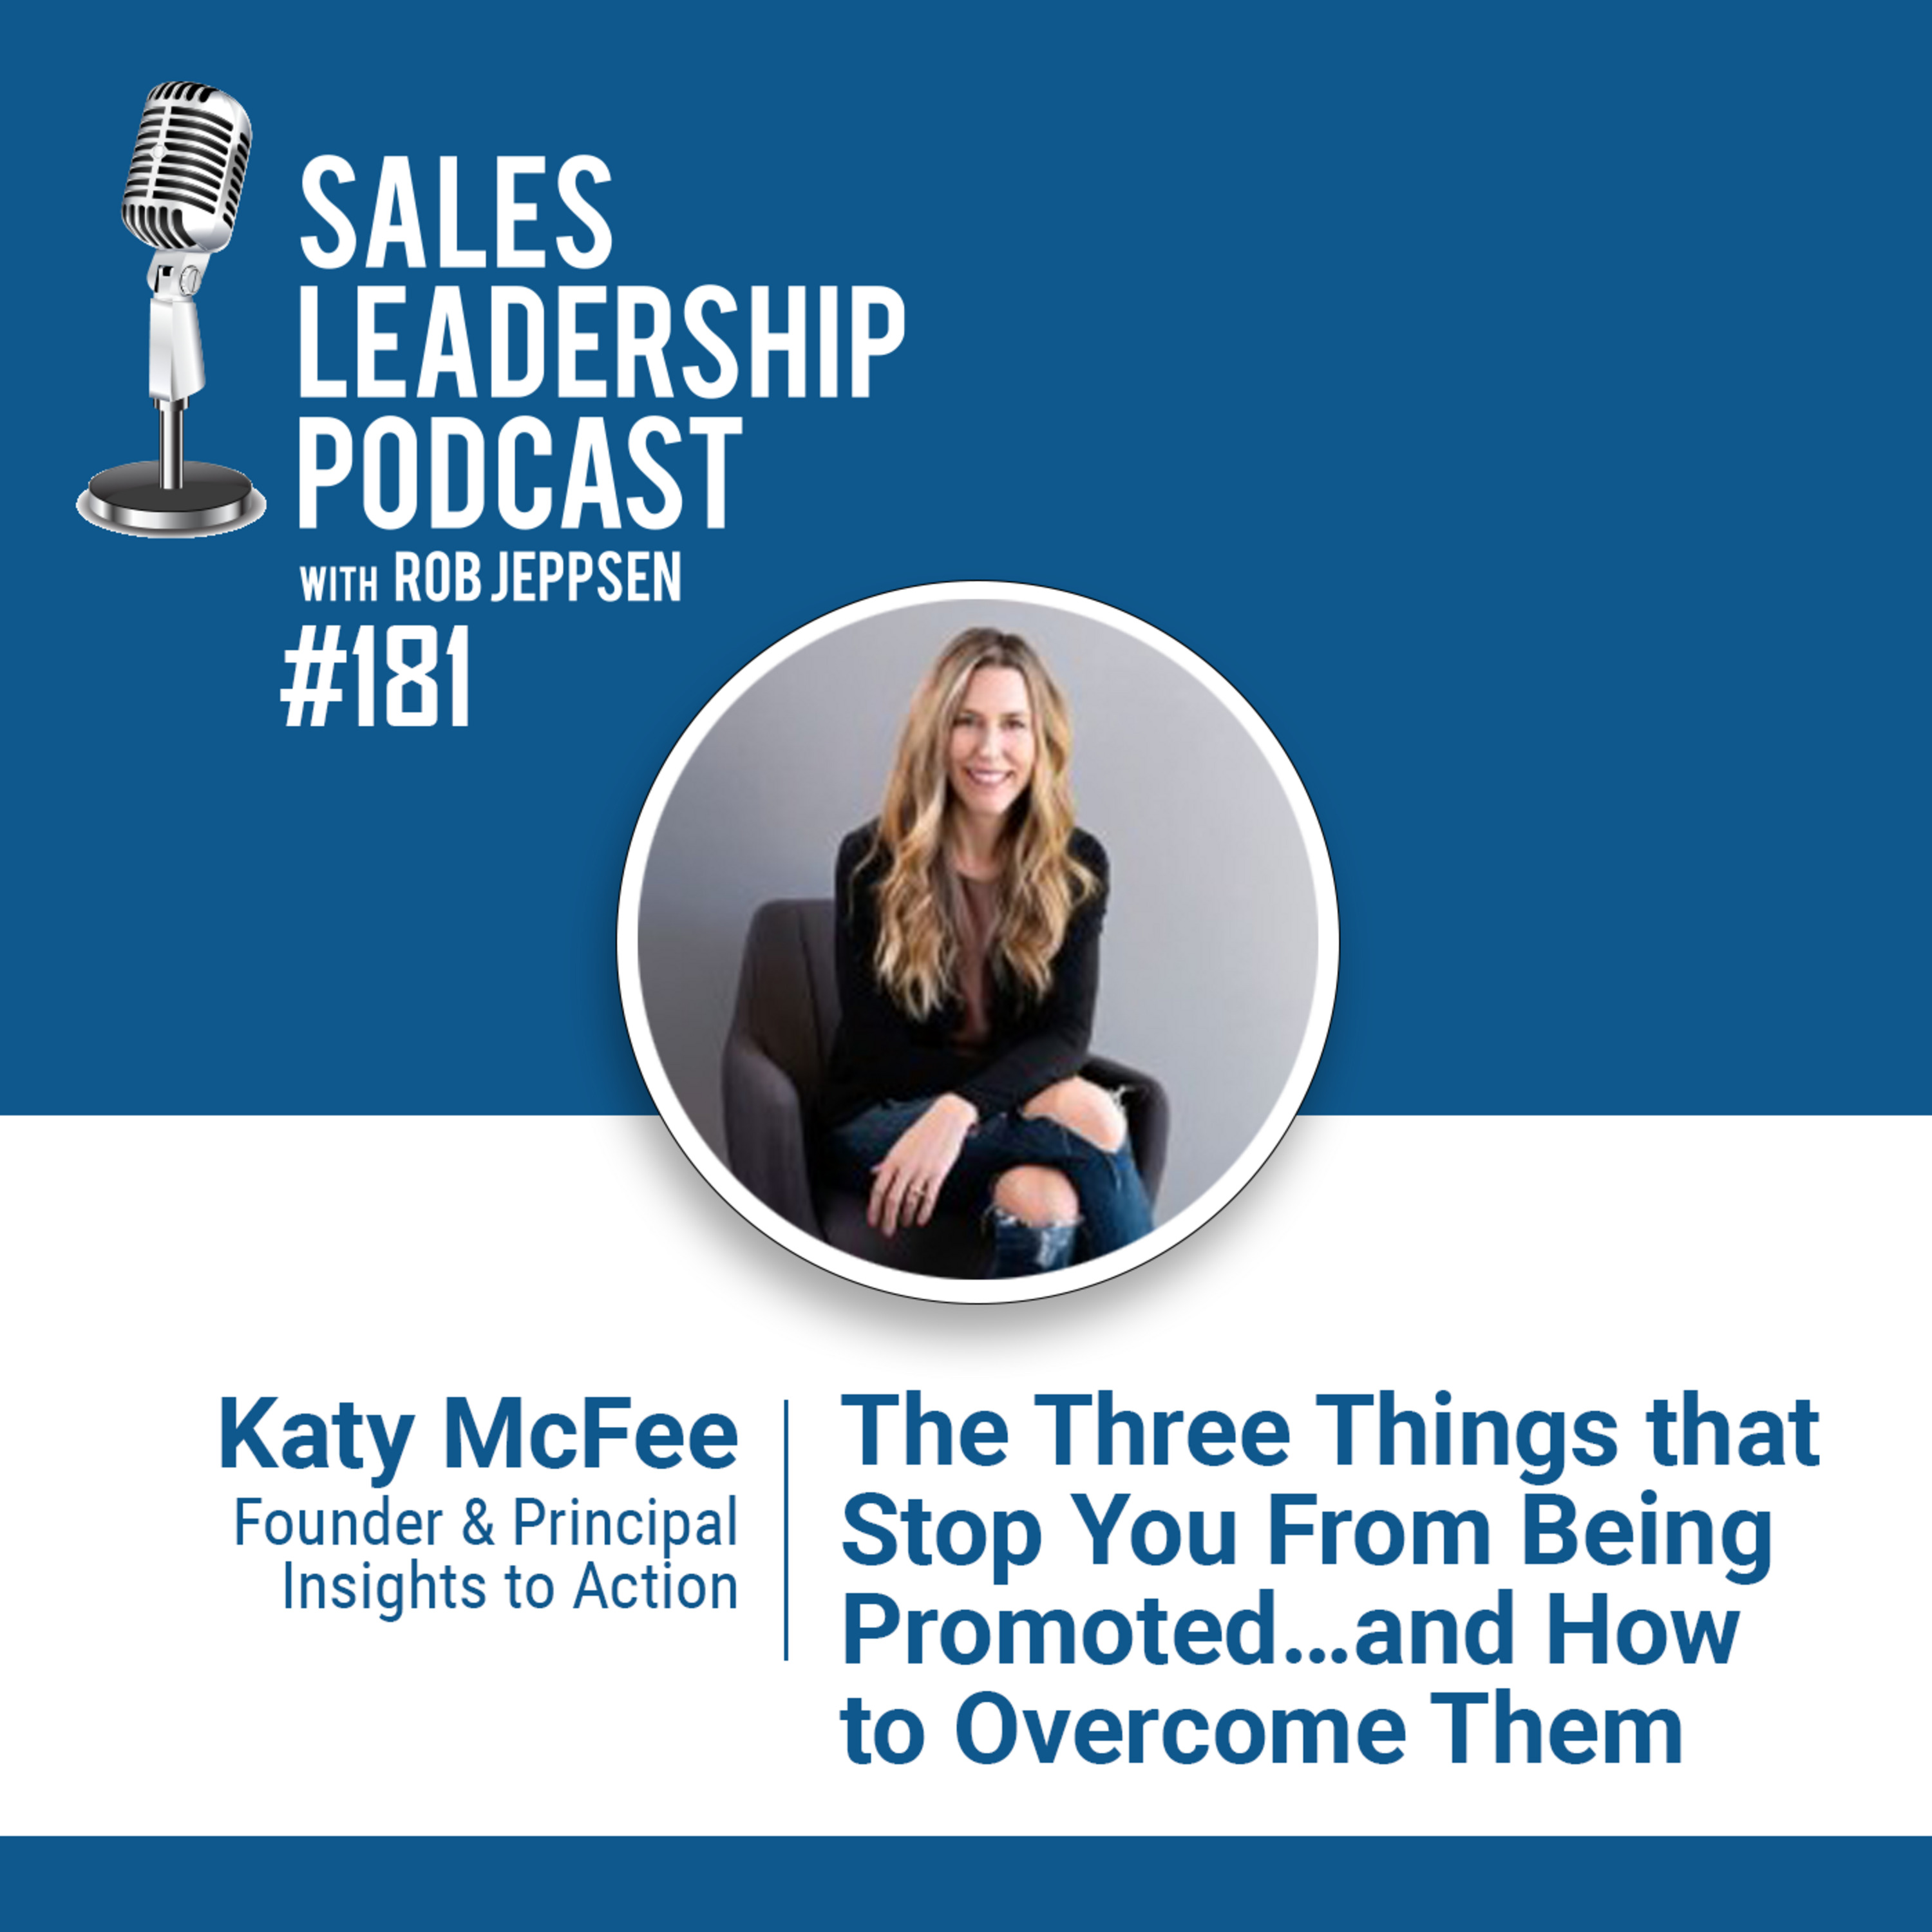 Episode 182: #181: Katy McFee of Insights to Action — The 3 Things that Stop You From Being Promoted…and How to Overcome Them